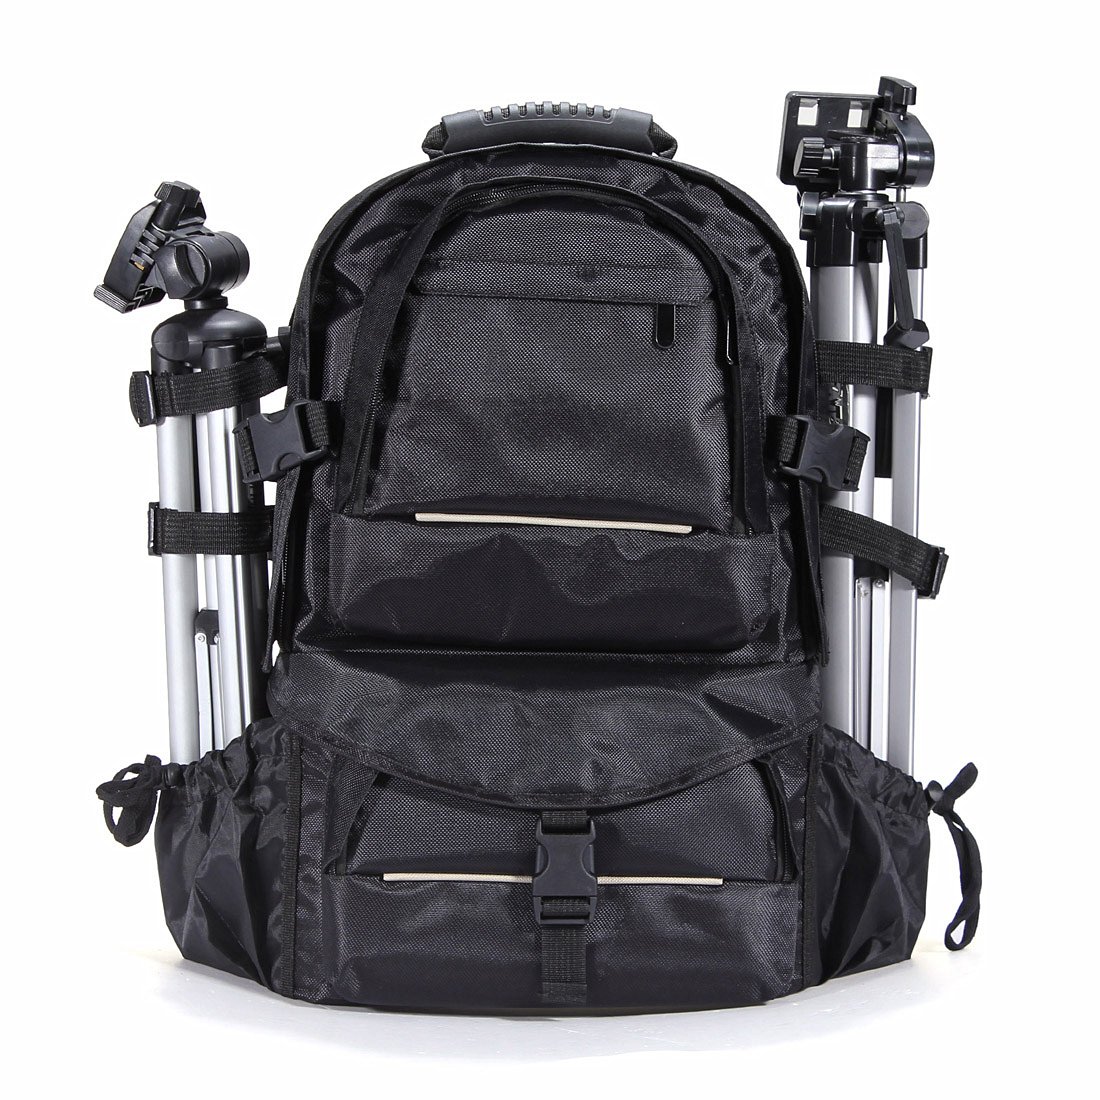 Waterproof Nylon Camera Backpack Bag With Rain Cover For Canon Nikon 1